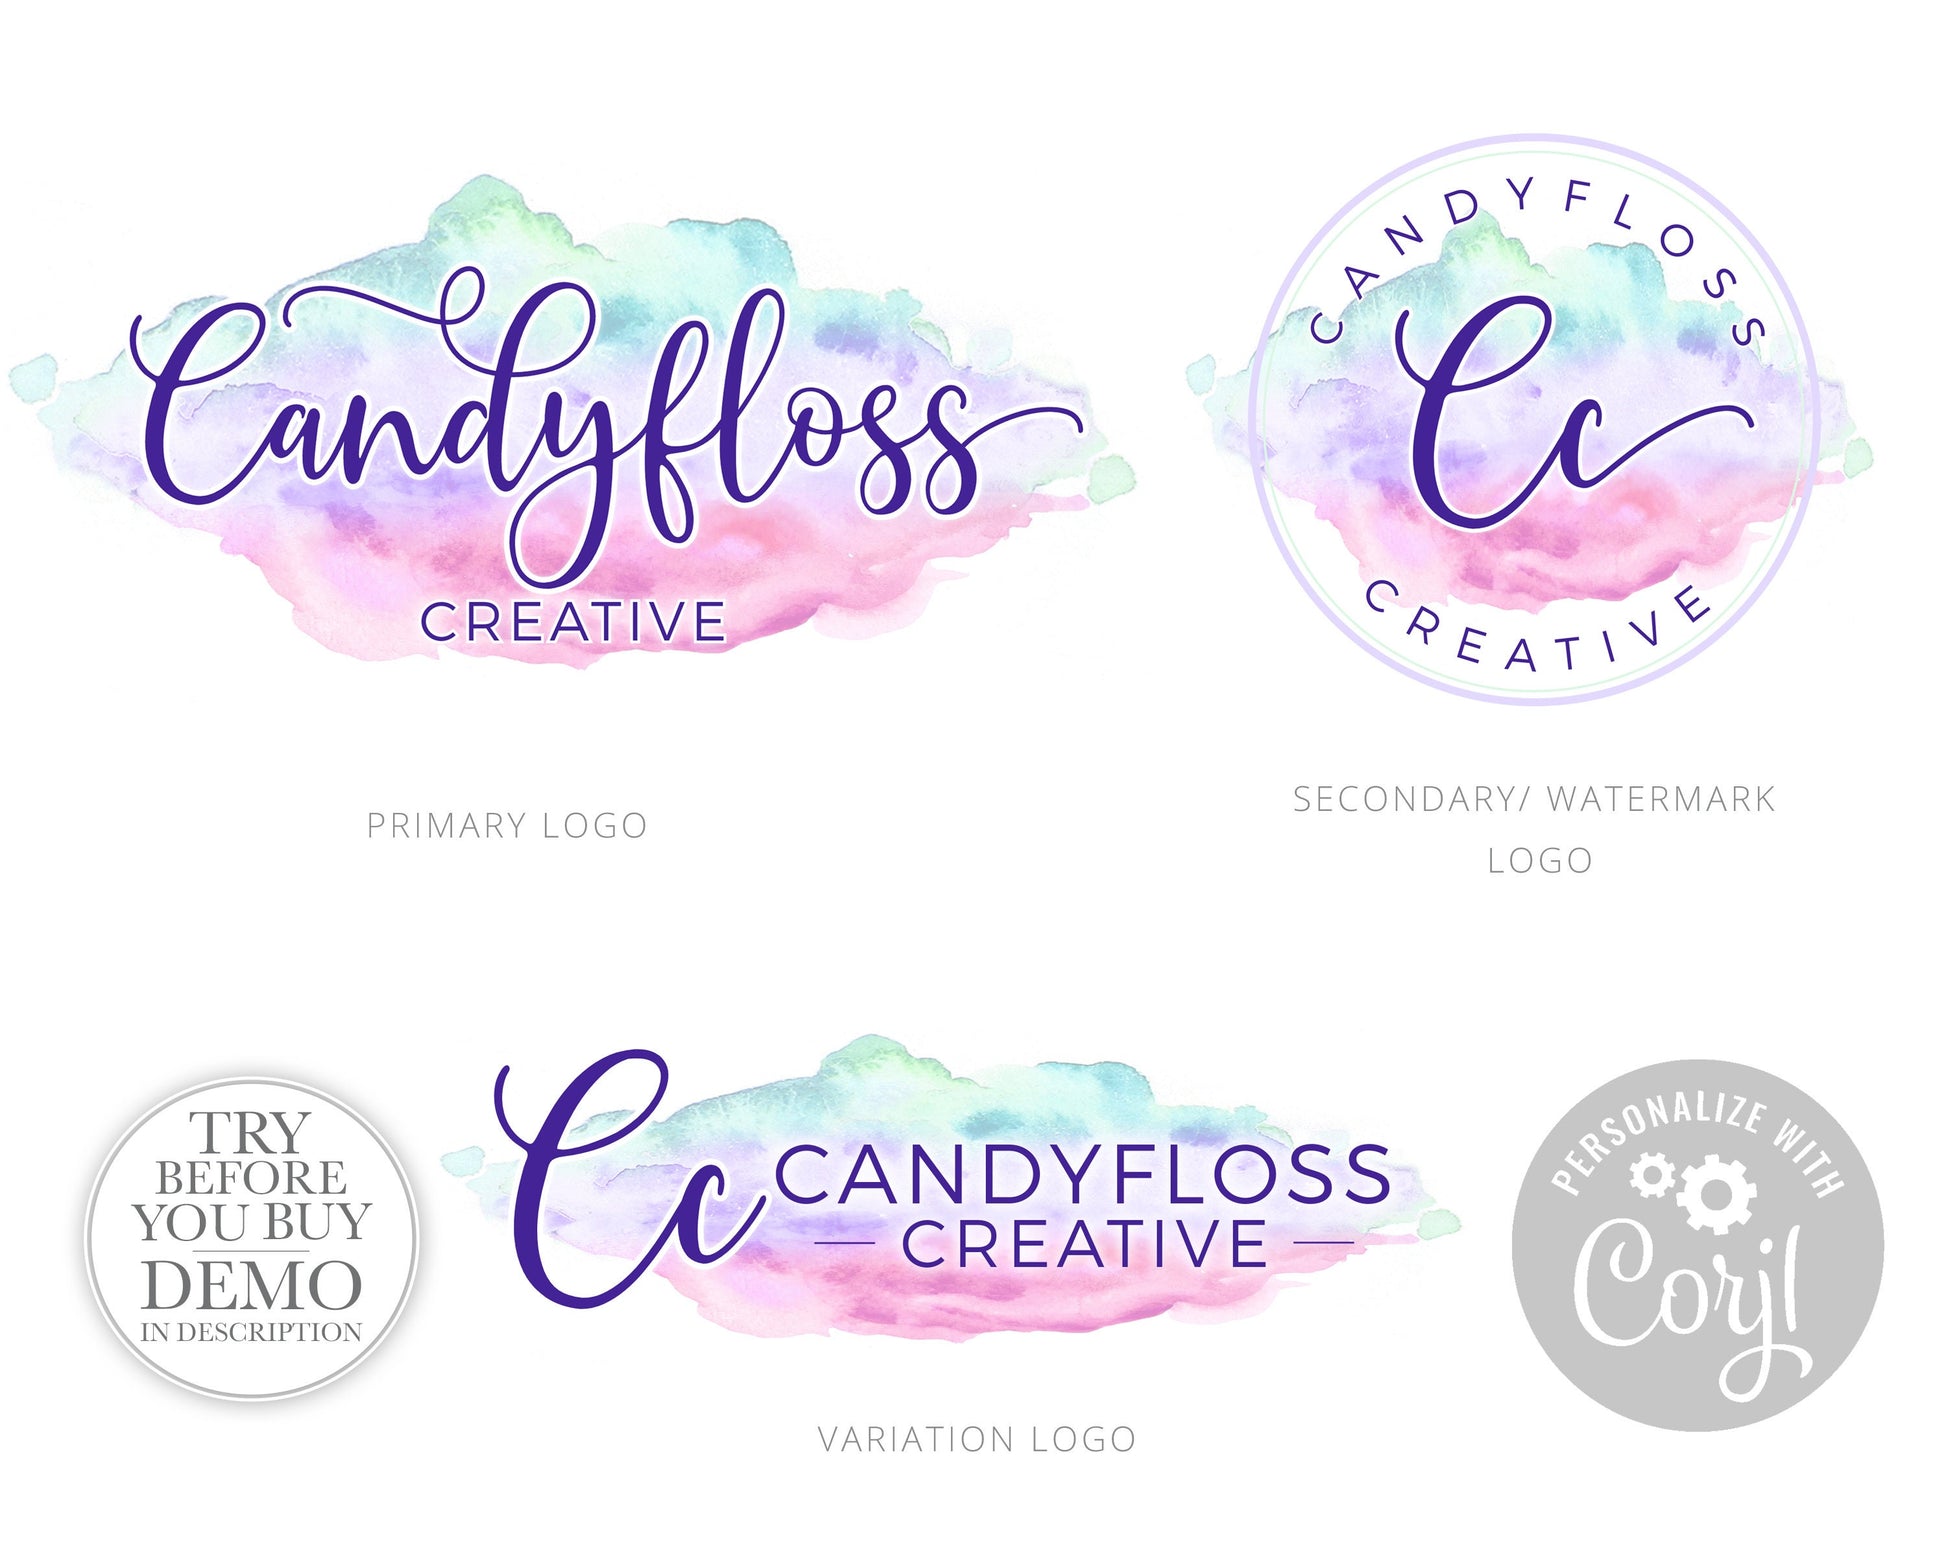 5pc Logo Suite & Social Instant Download Branding Kit Candyfloss Pastel Watercolor | Premade Business logo | Edit yourself Online! CF-001